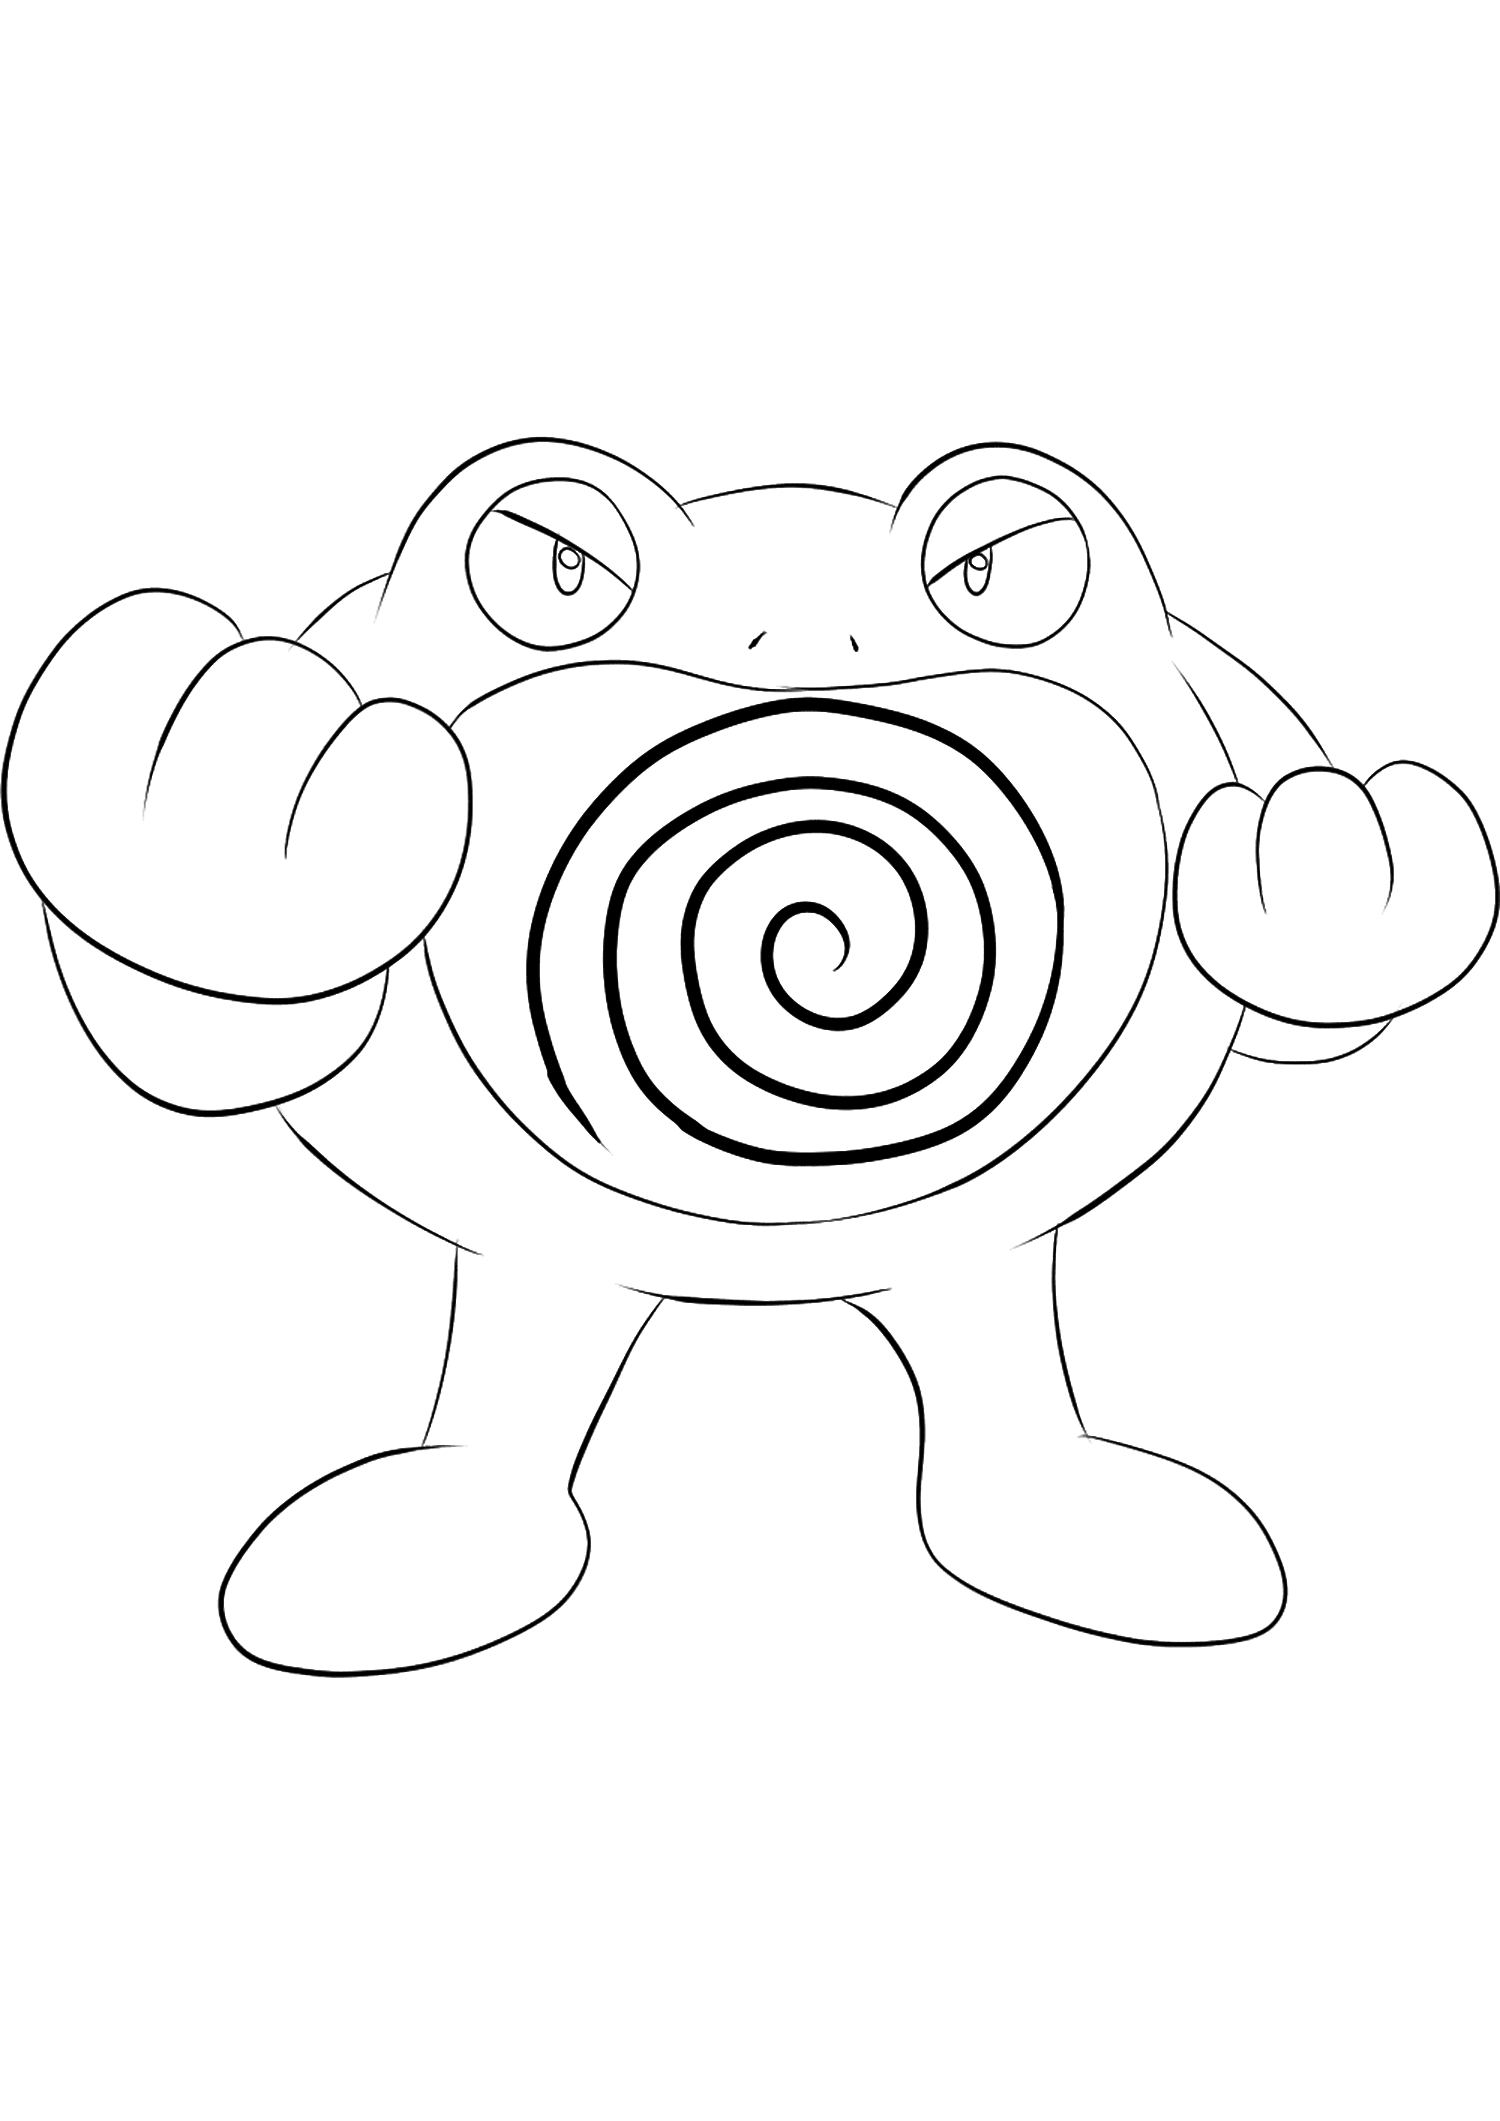 Poliwrath No.62 : Pokemon Generation I - All Pokemon coloring pages